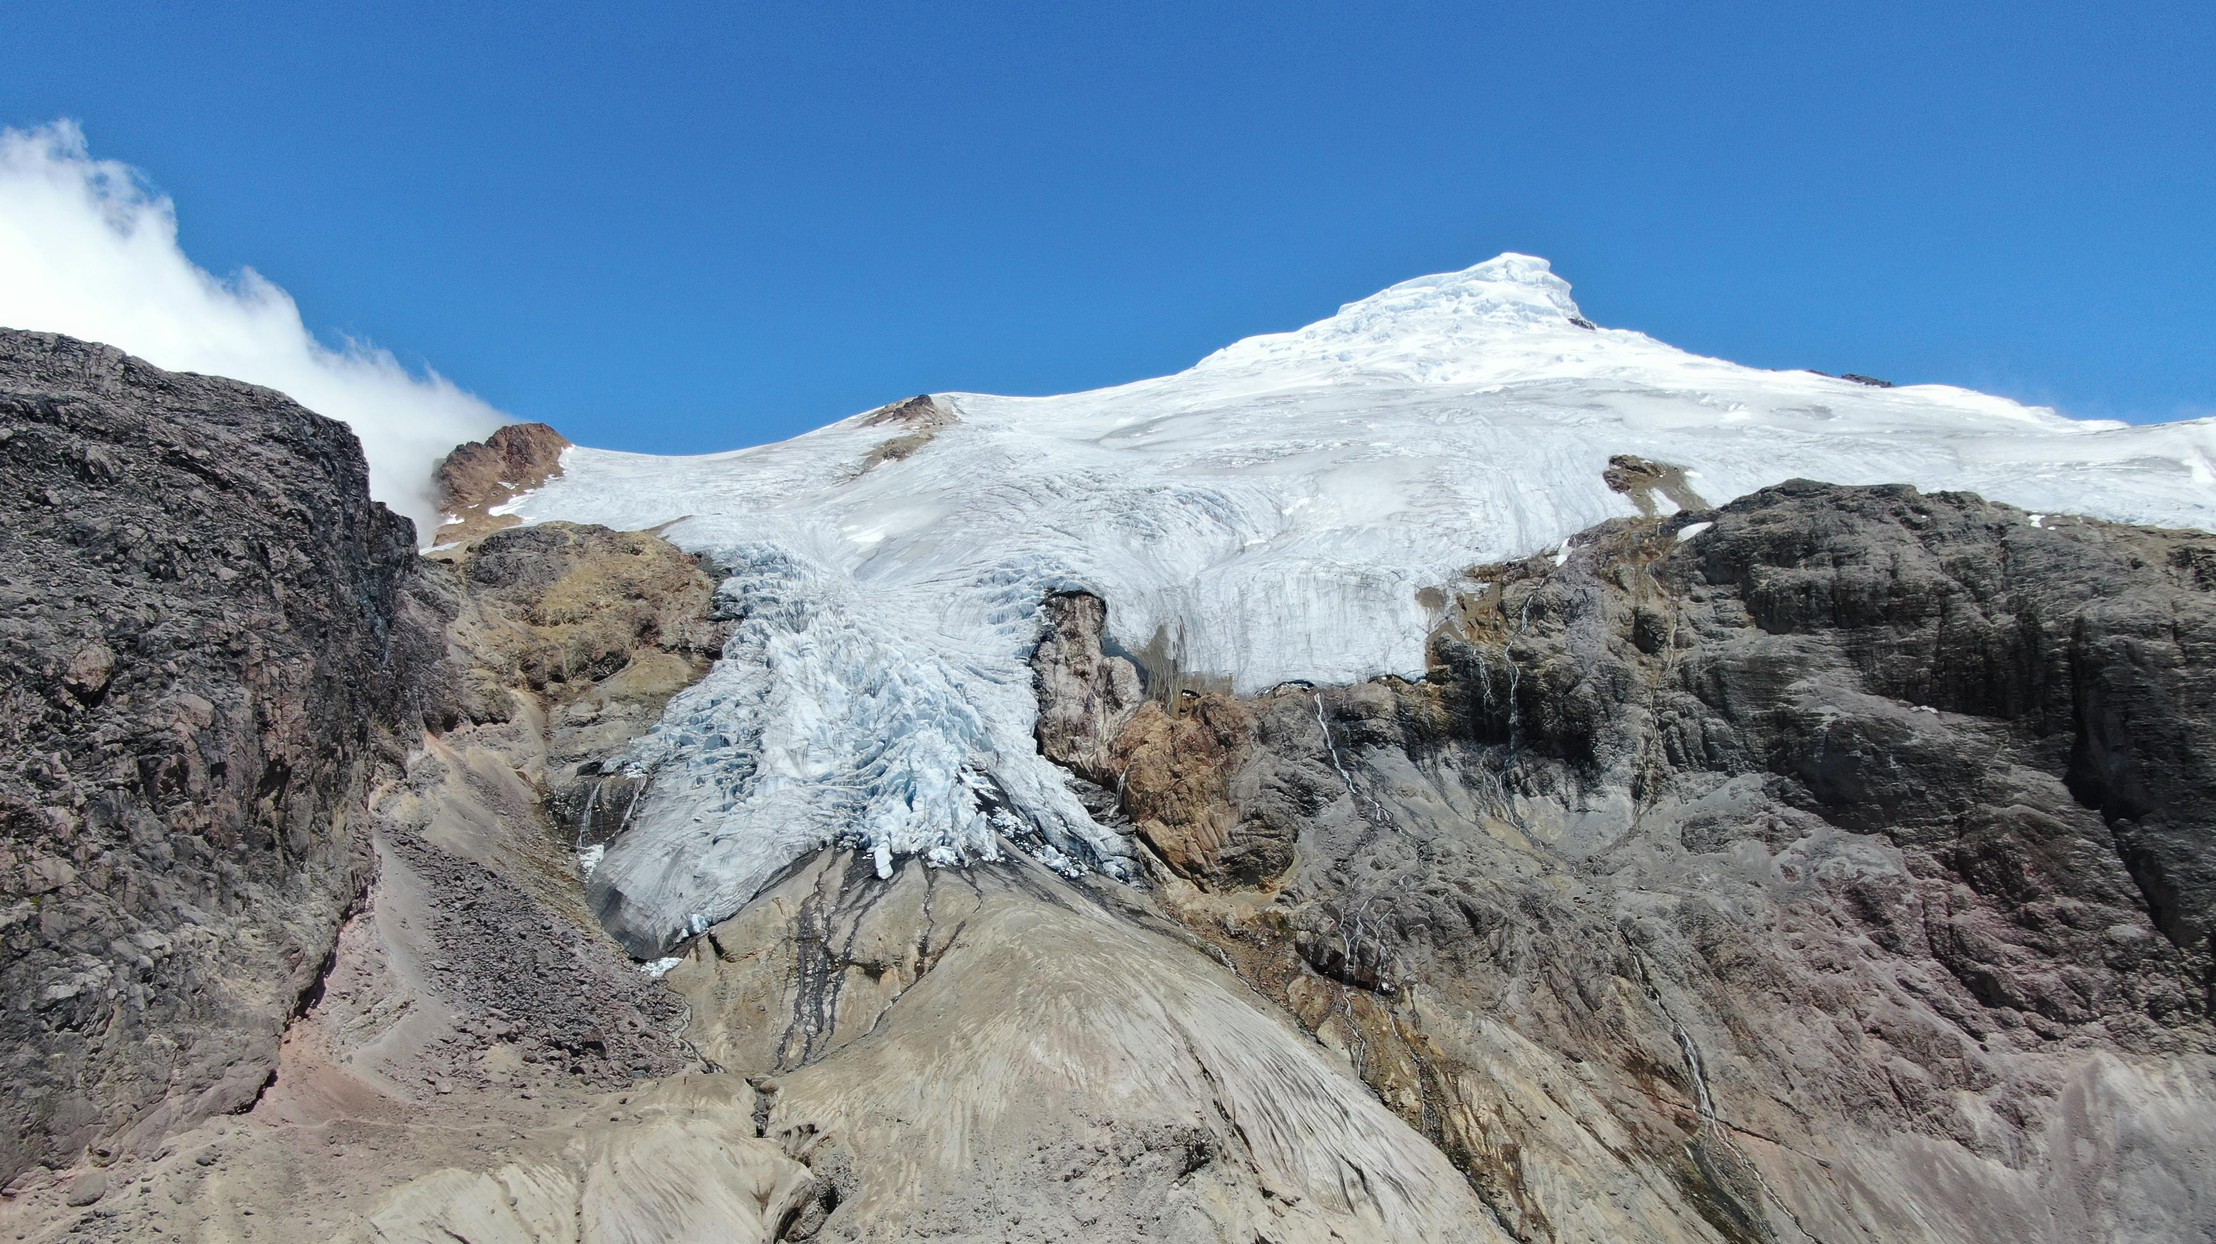 Glacier Shrinkage Is Causing a “Green Transition”